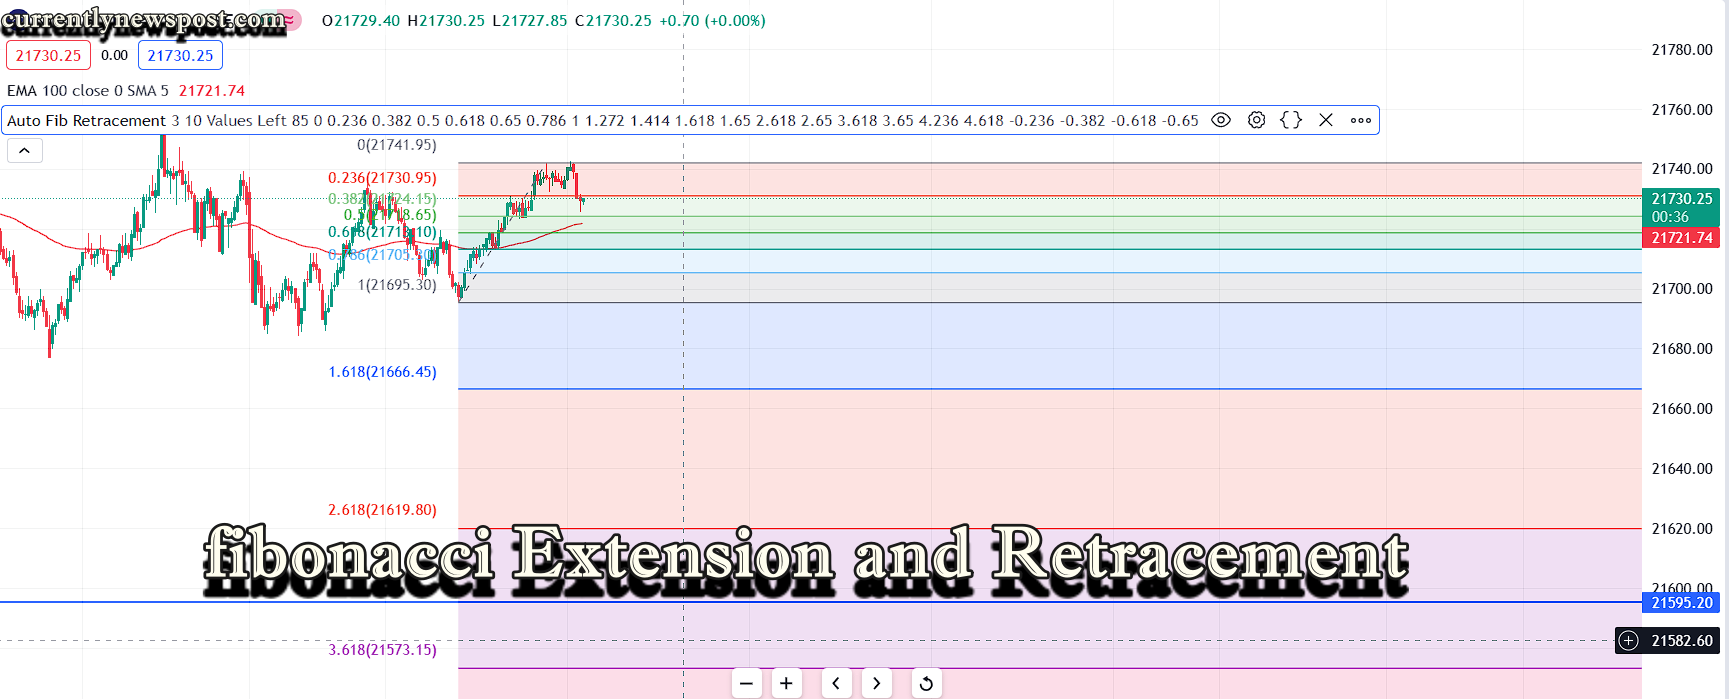 "fibonacci Extension and Retracement from Beginning to Advance"
